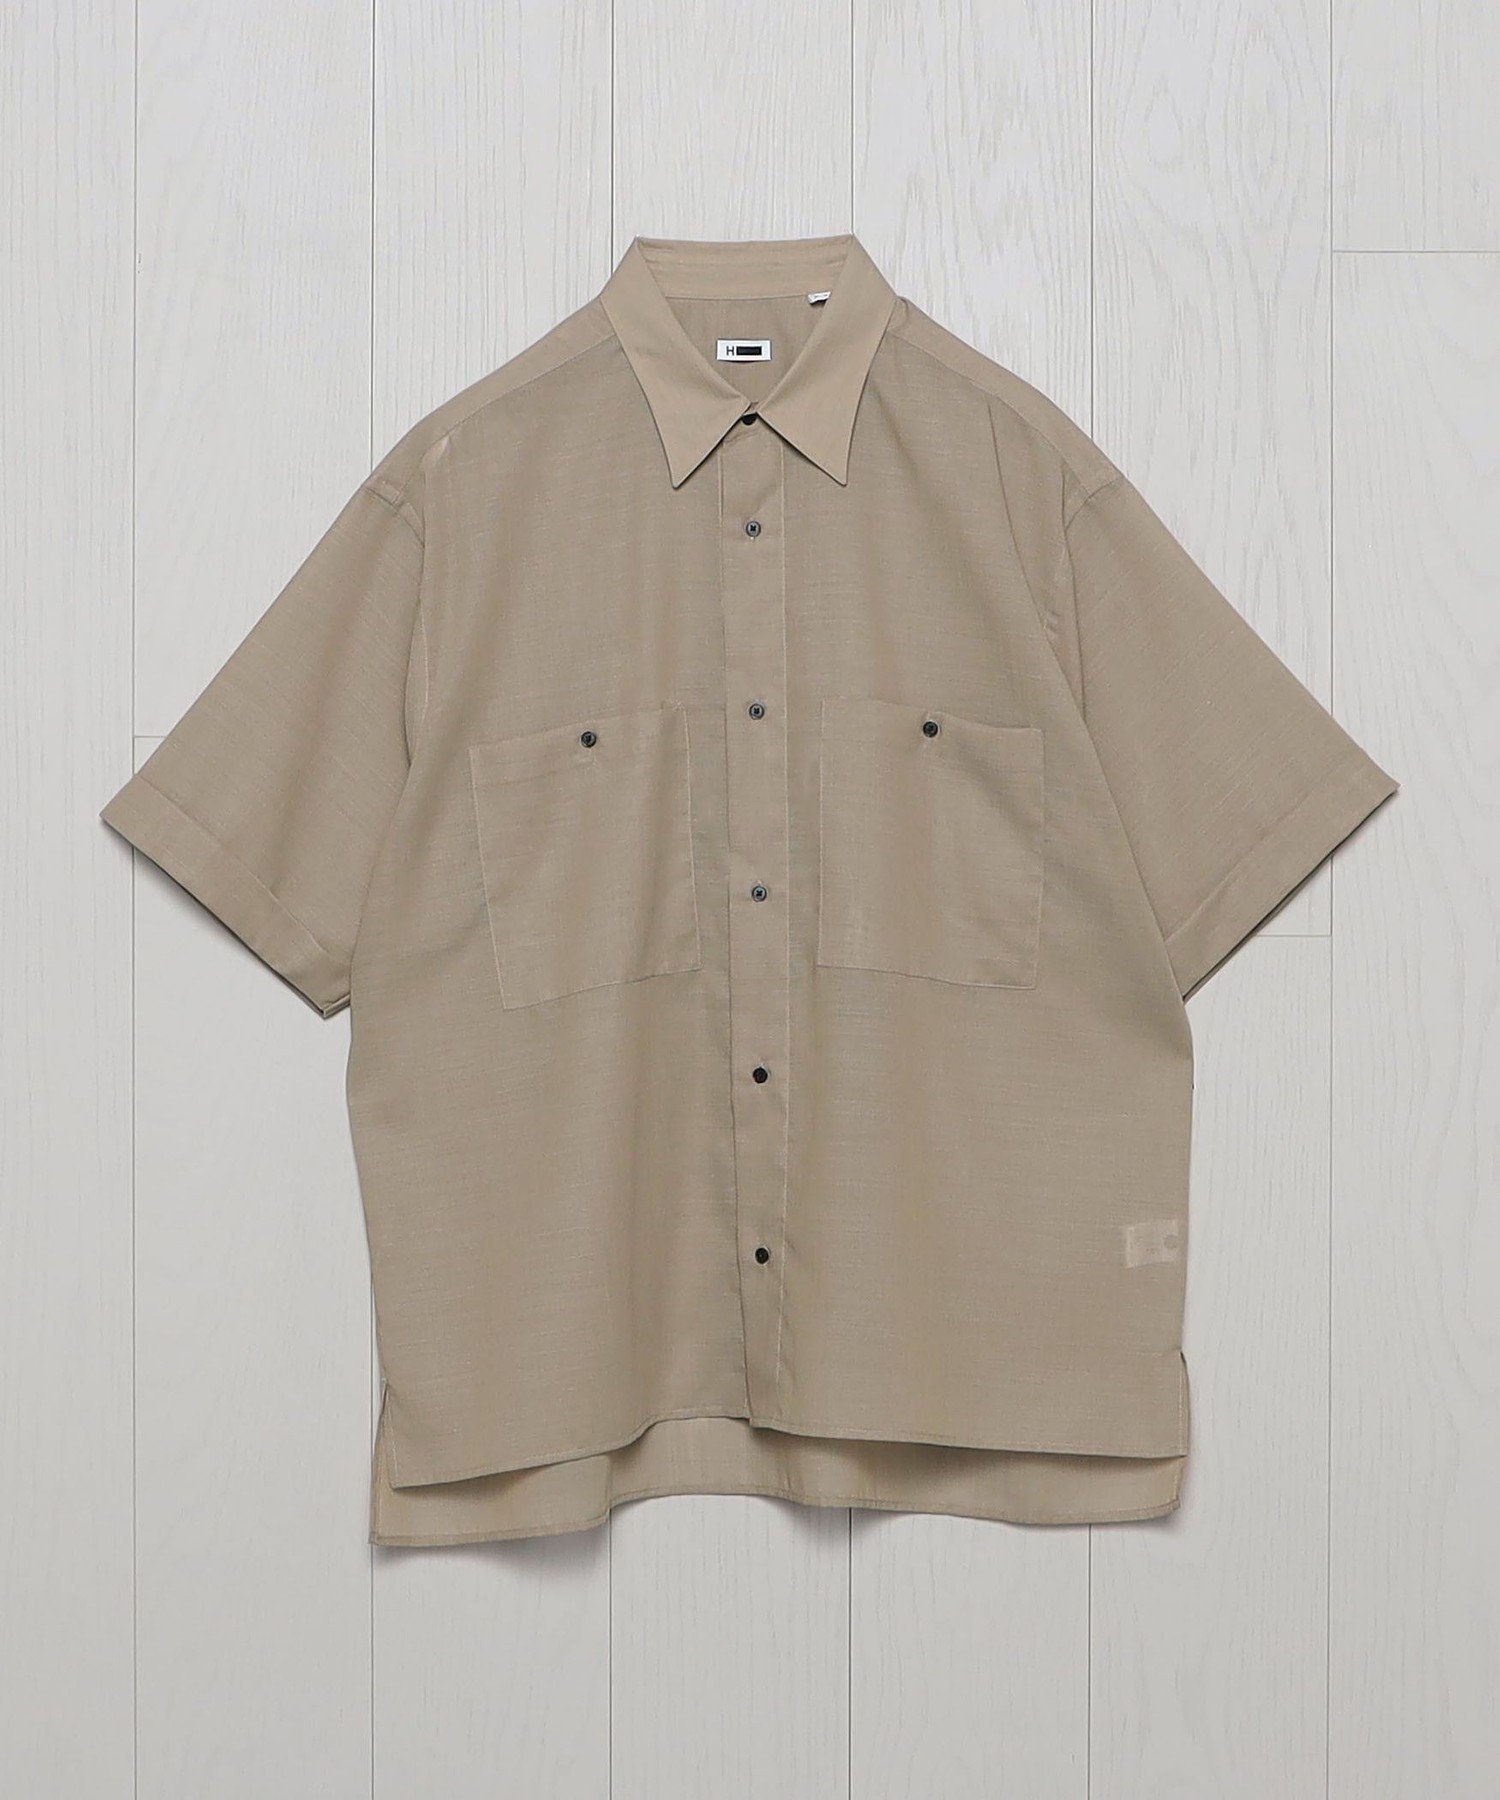 【SALE／40%OFF】BEAUTY&YOUTH UNITED ARROWS ＜H＞SCREEN VOILE PATCH REGULER COLLAR SHORT SLEEVE SHIRT/シャツ: ユナイテッドアローズ アウトレット トップス シャツ・ブラウス ベージュ ブラック【送料無料】